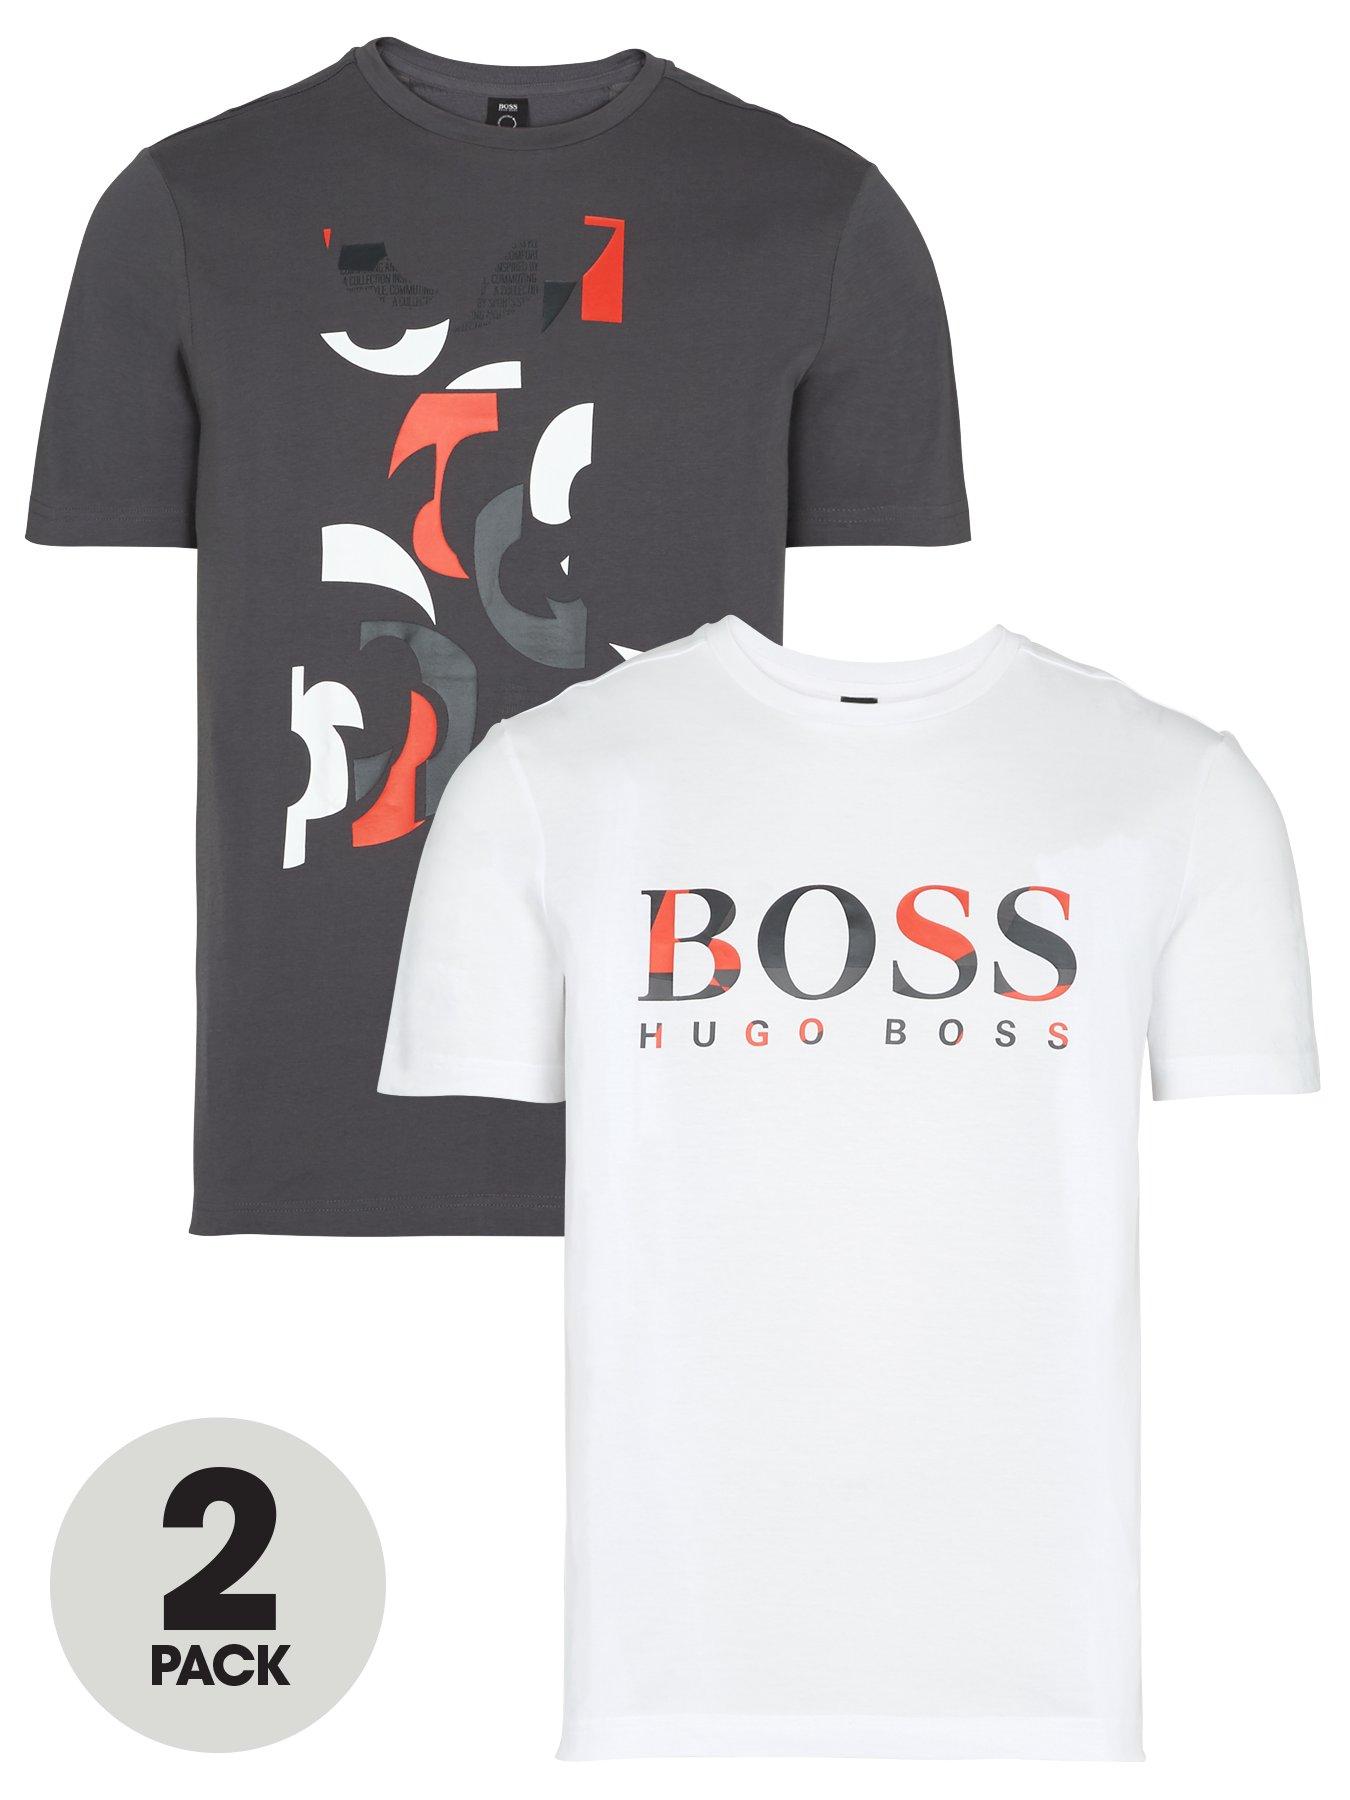 BOSS | Hugo Boss | Next Day Delivery 